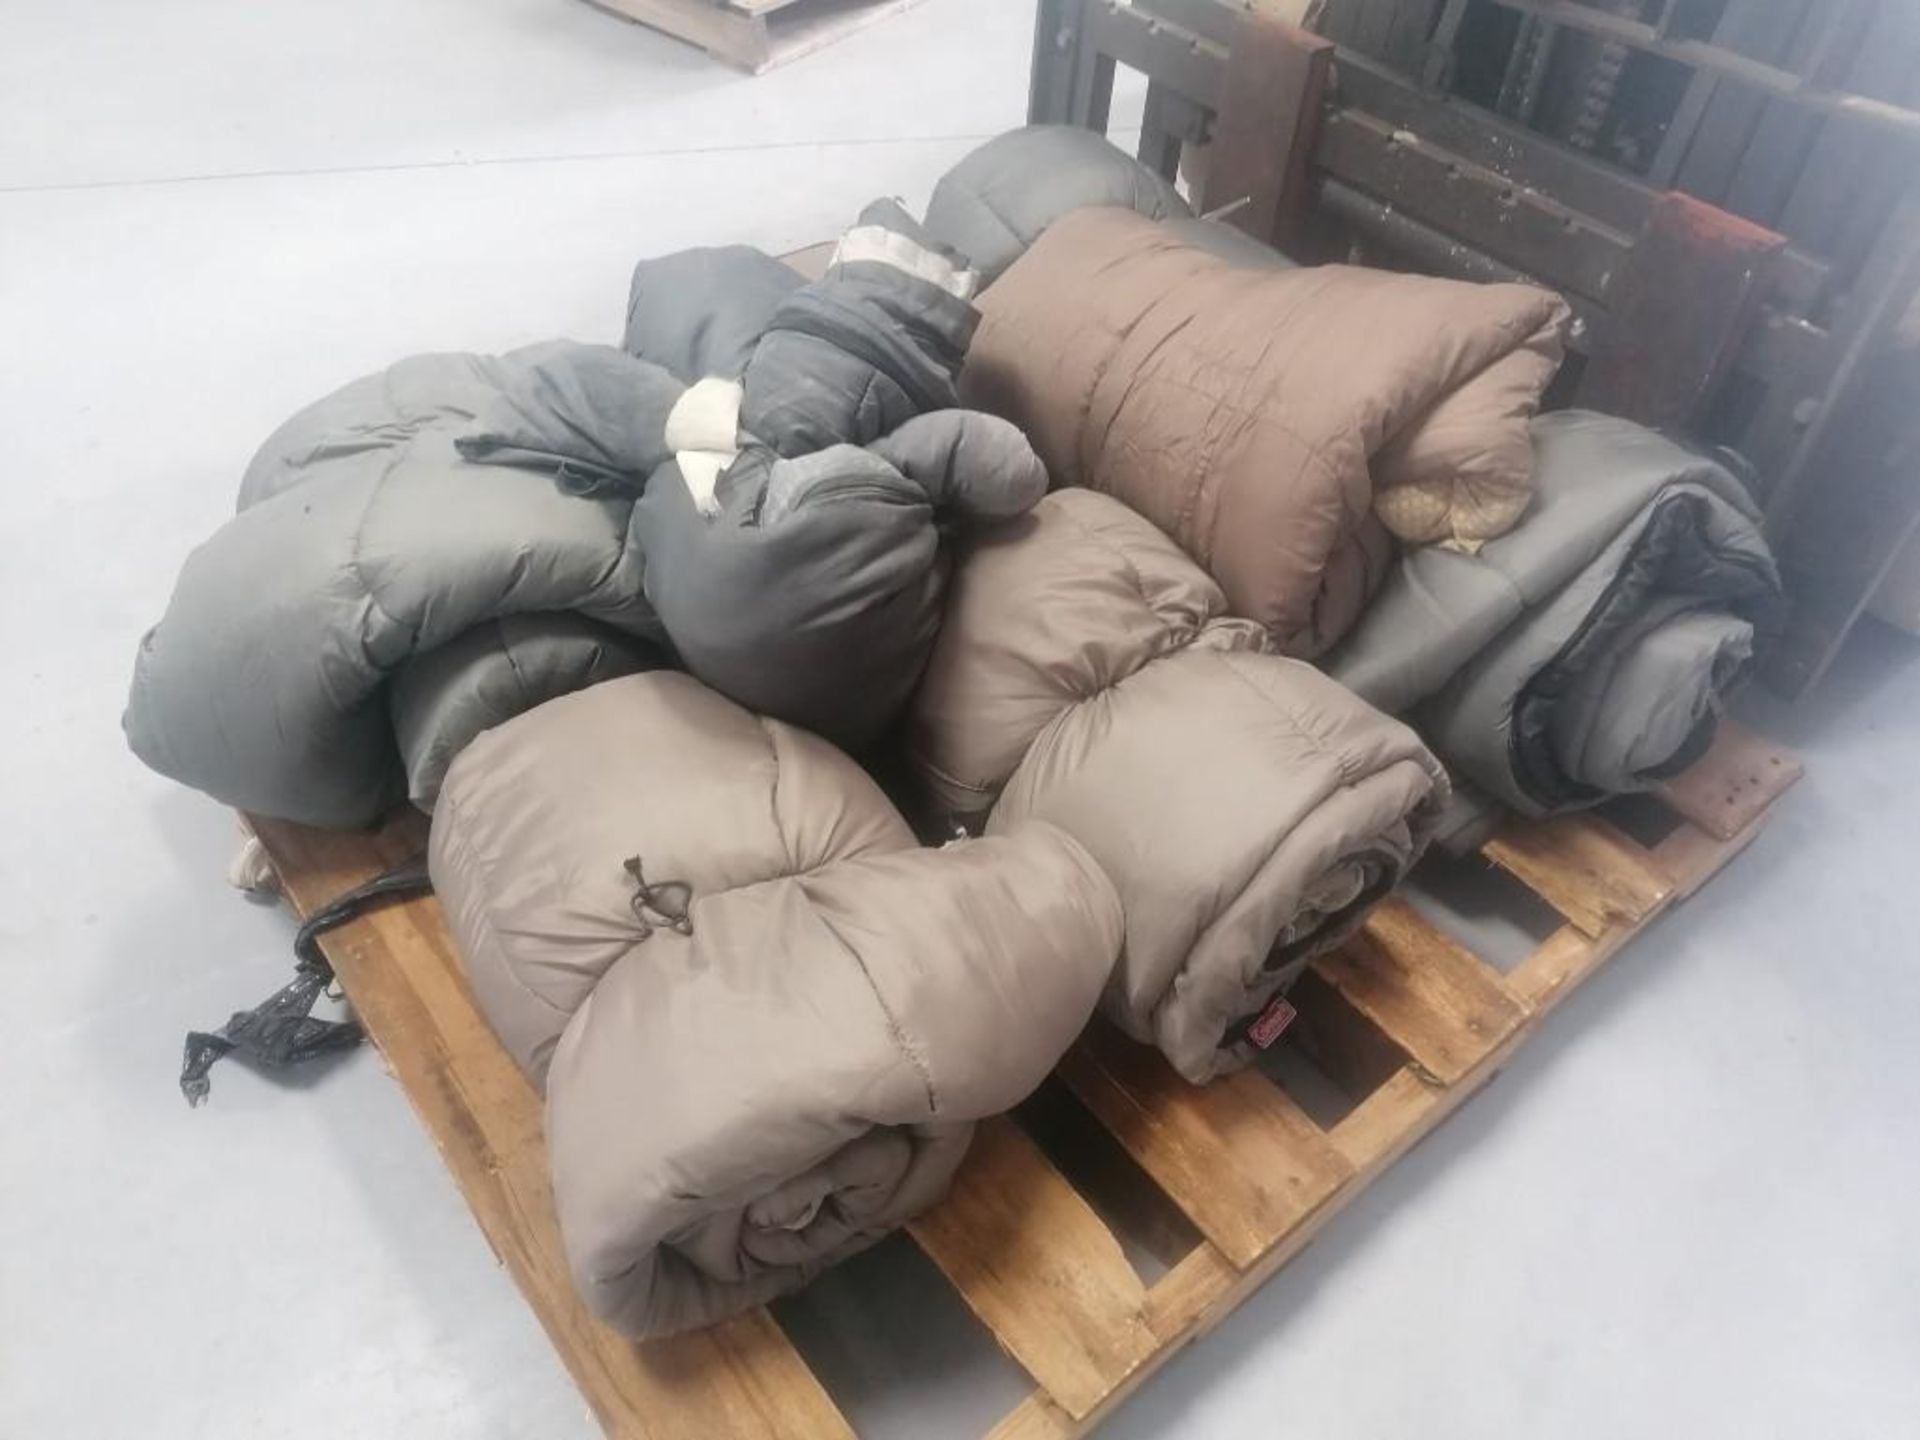 (8) Sleeping Bags. Located at 301 E Henry Street, Mt. Pleasant, IA 52641.